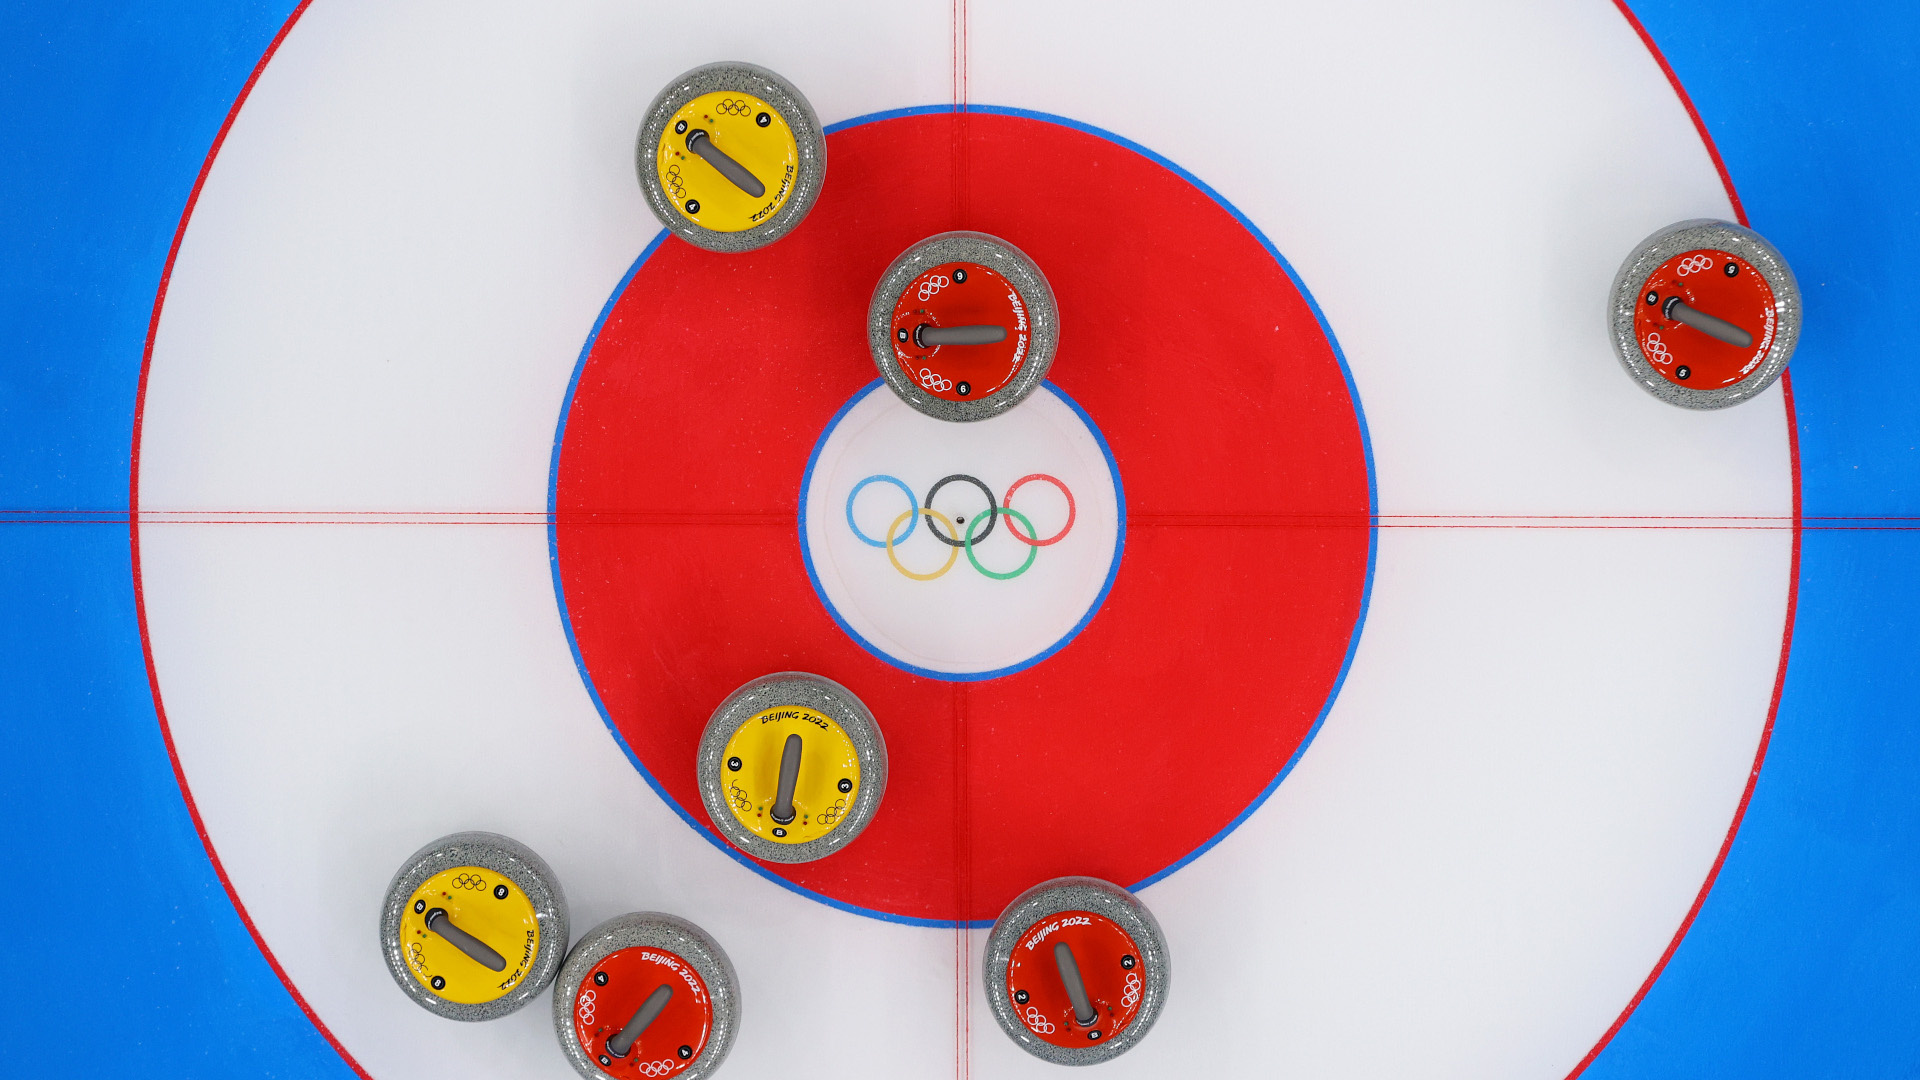 Curling live stream, Watching winter Olympics, Medal matches, Online streaming, 1920x1080 Full HD Desktop